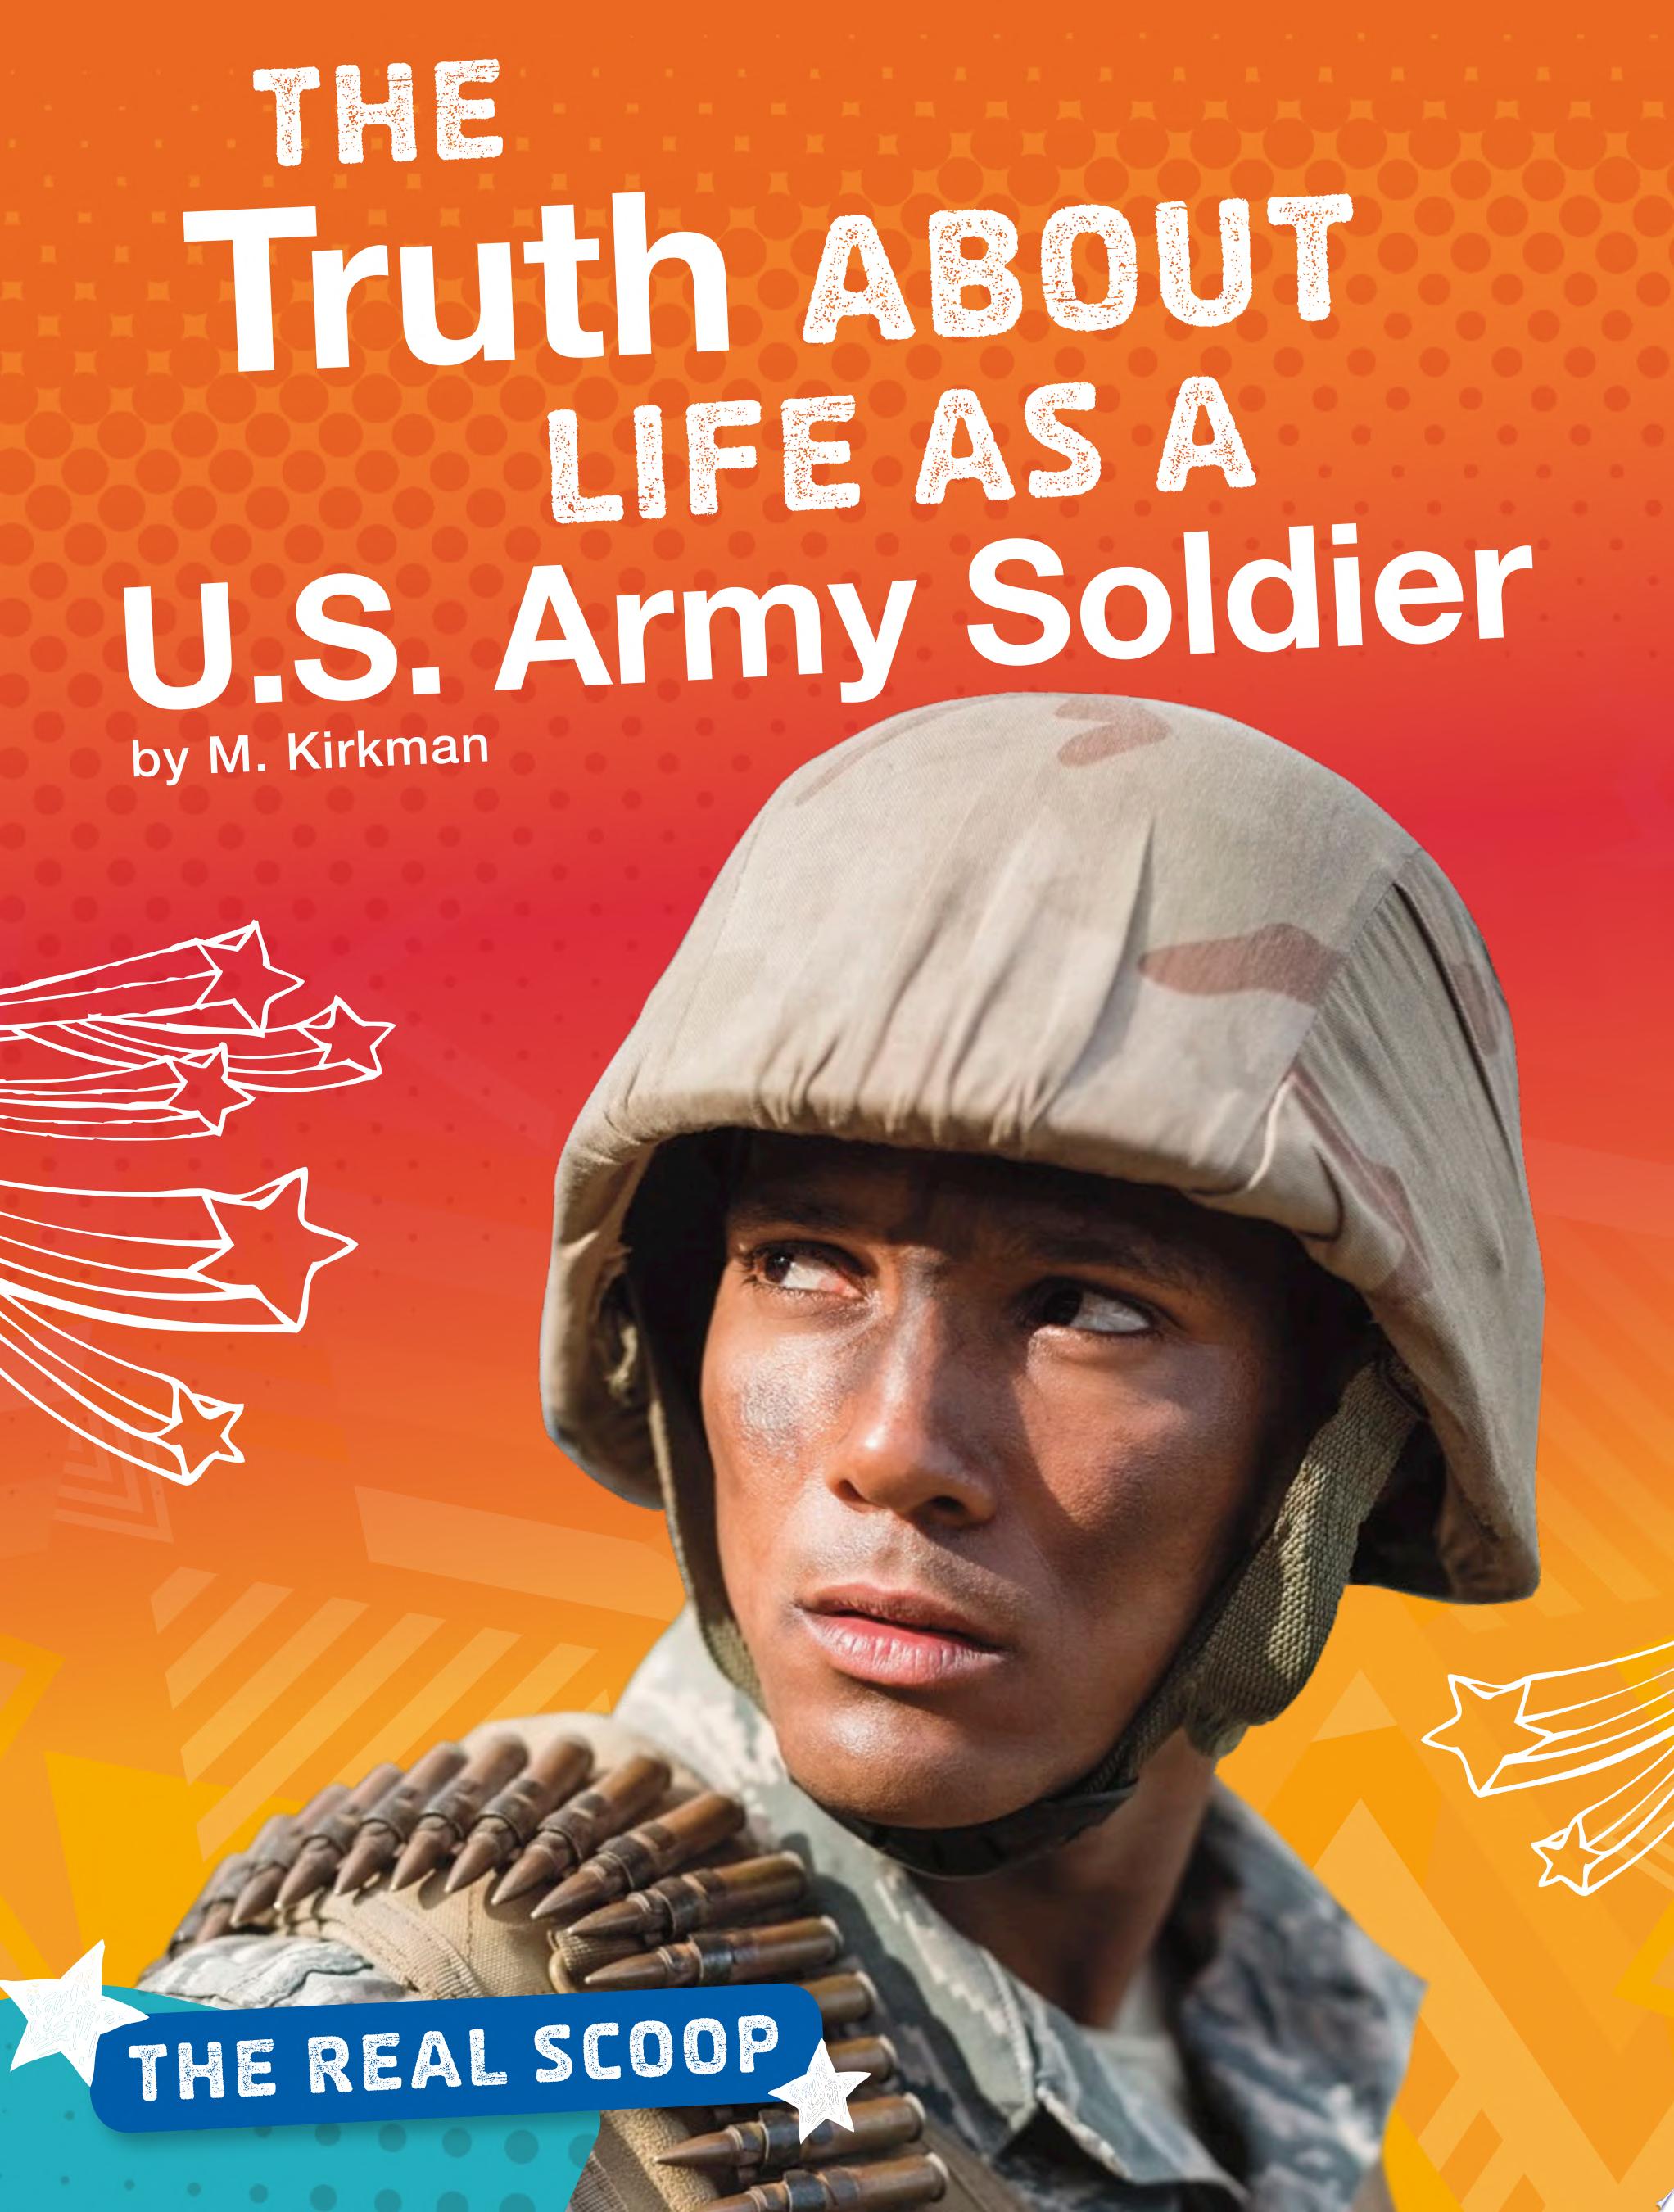 Image for "The Truth about Life as a U.S. Army Soldier"